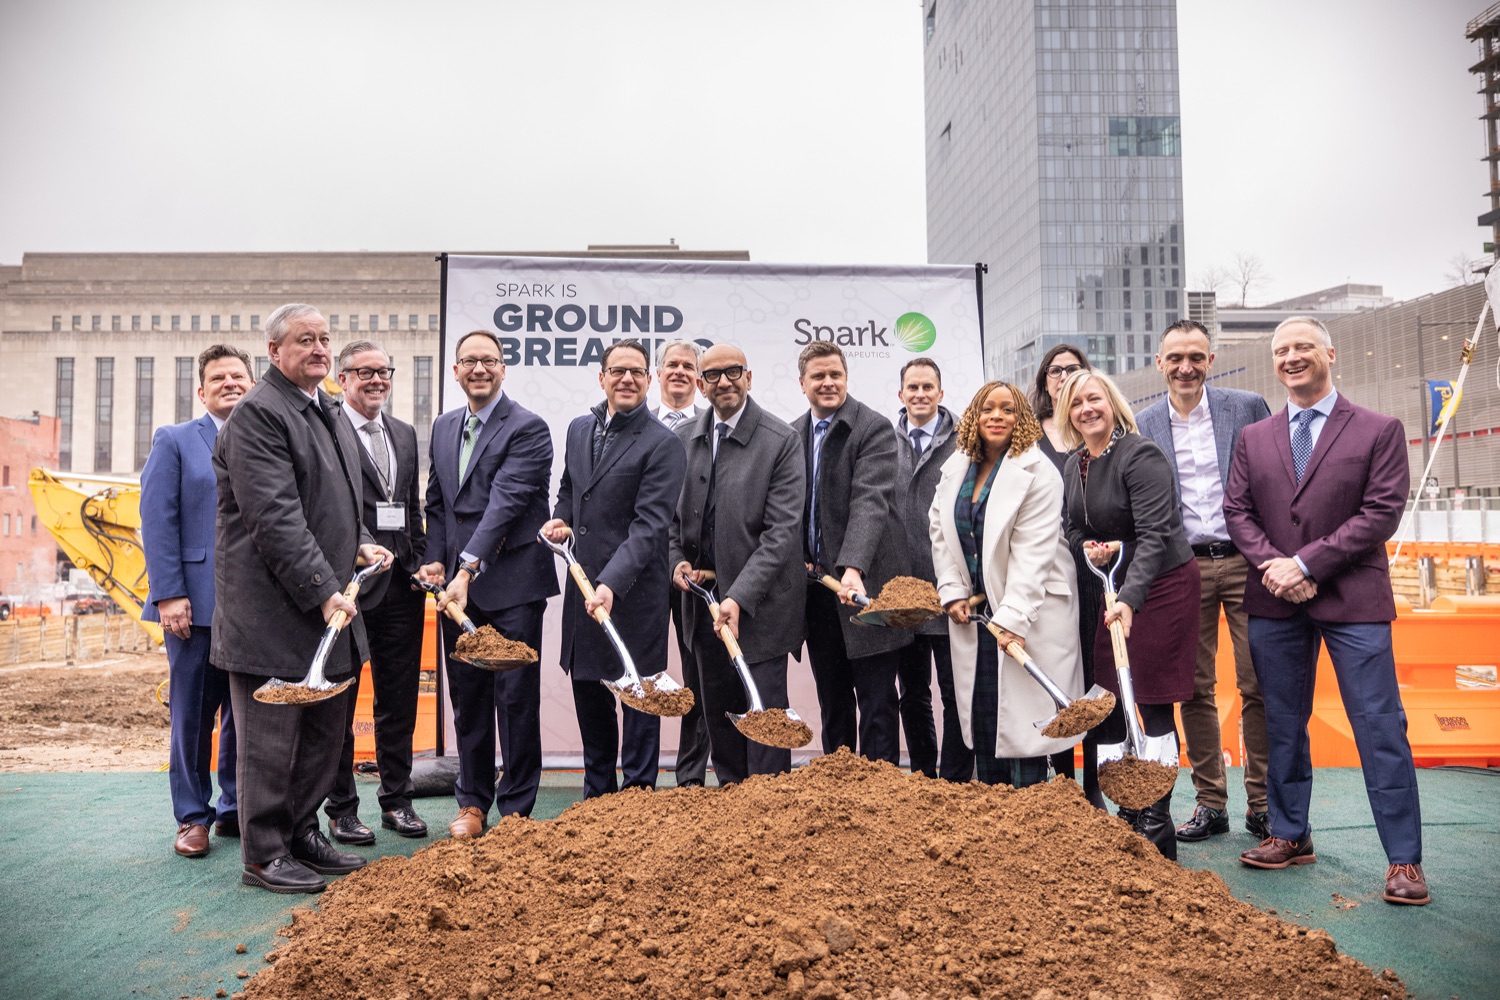 Pennsylvania Governor Josh Shapiro participates in a groundbreaking for Spark Therapeutics at the future site of their new building, at 30th and Chestnut streets.  FEBRUARY 28, 2023 - PHILADELPHIA, PA<br><a href="https://filesource.amperwave.net/commonwealthofpa/photo/22728_gov_spark_dz_0002.JPG" target="_blank">⇣ Download Photo</a>